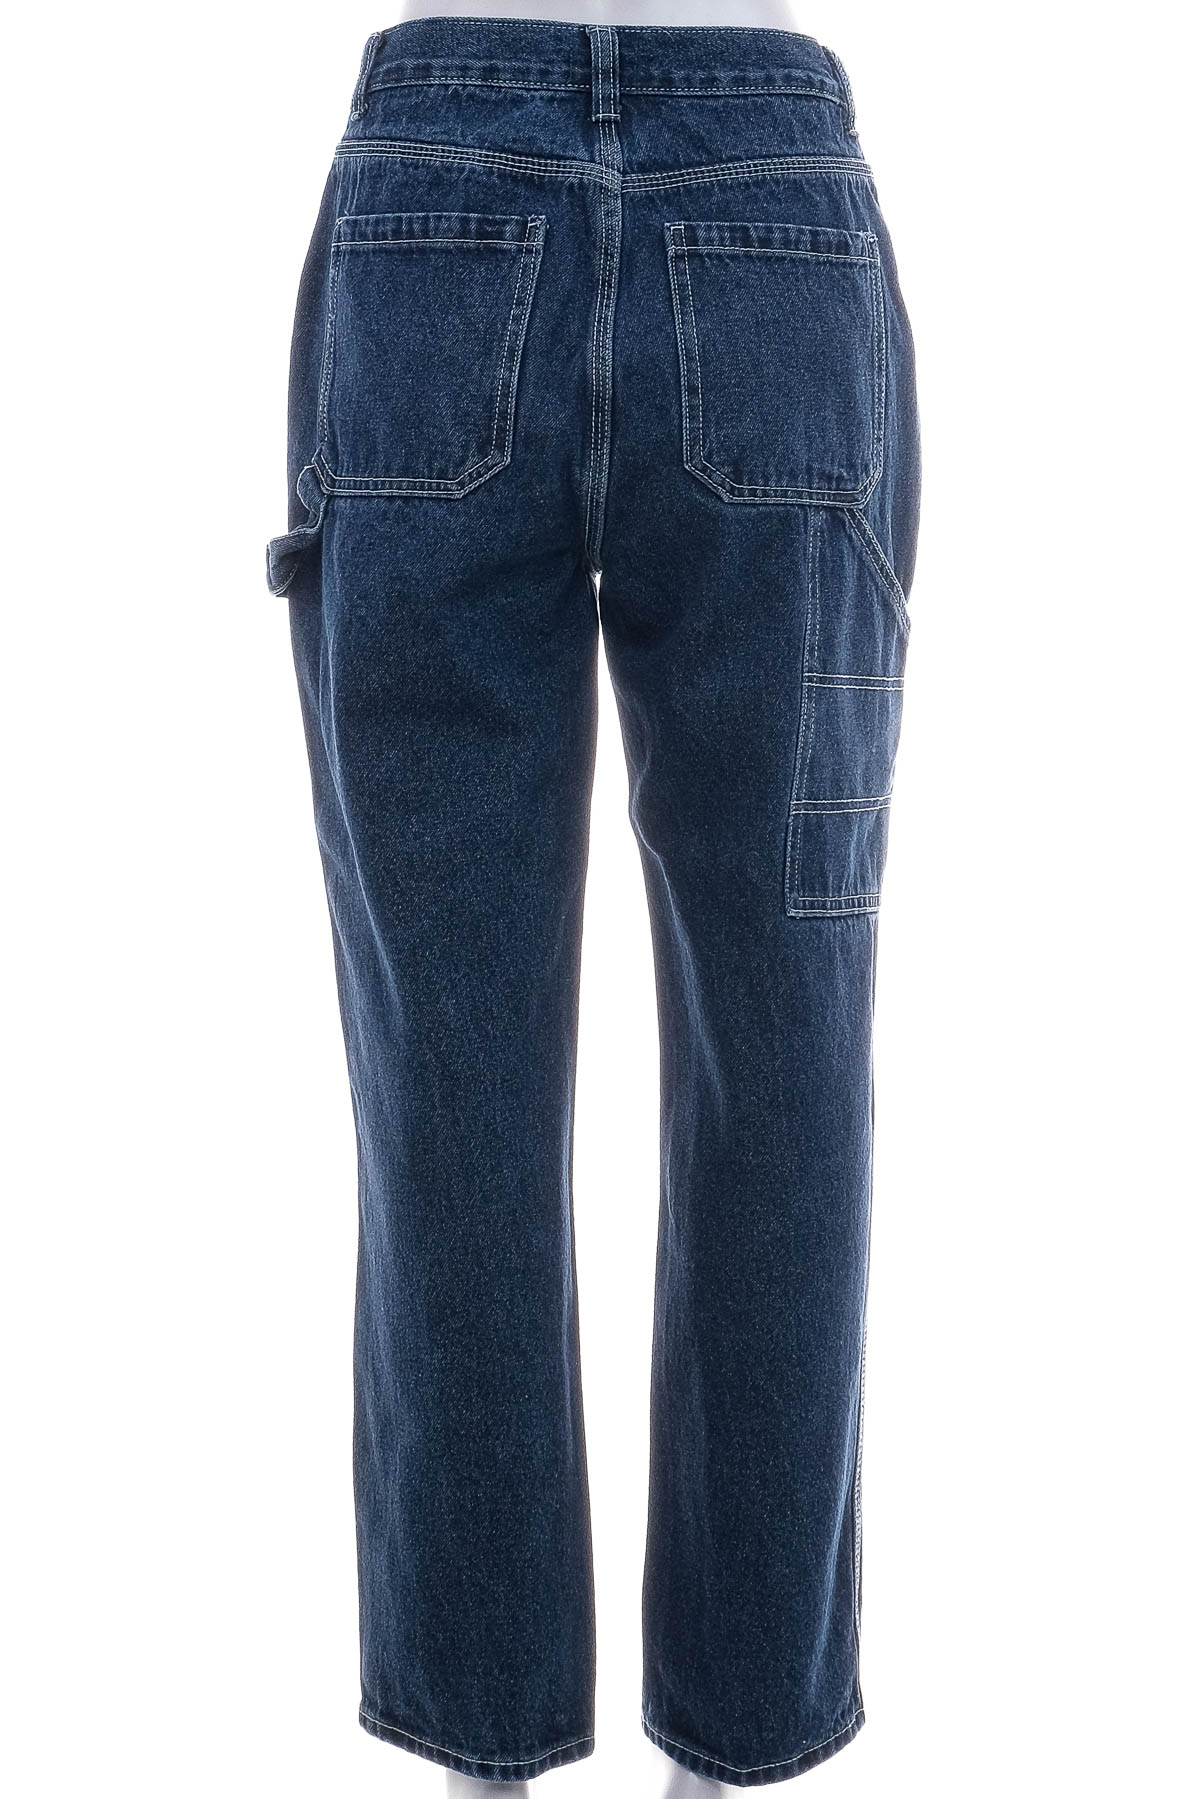 Women's jeans - Simple Society - 1